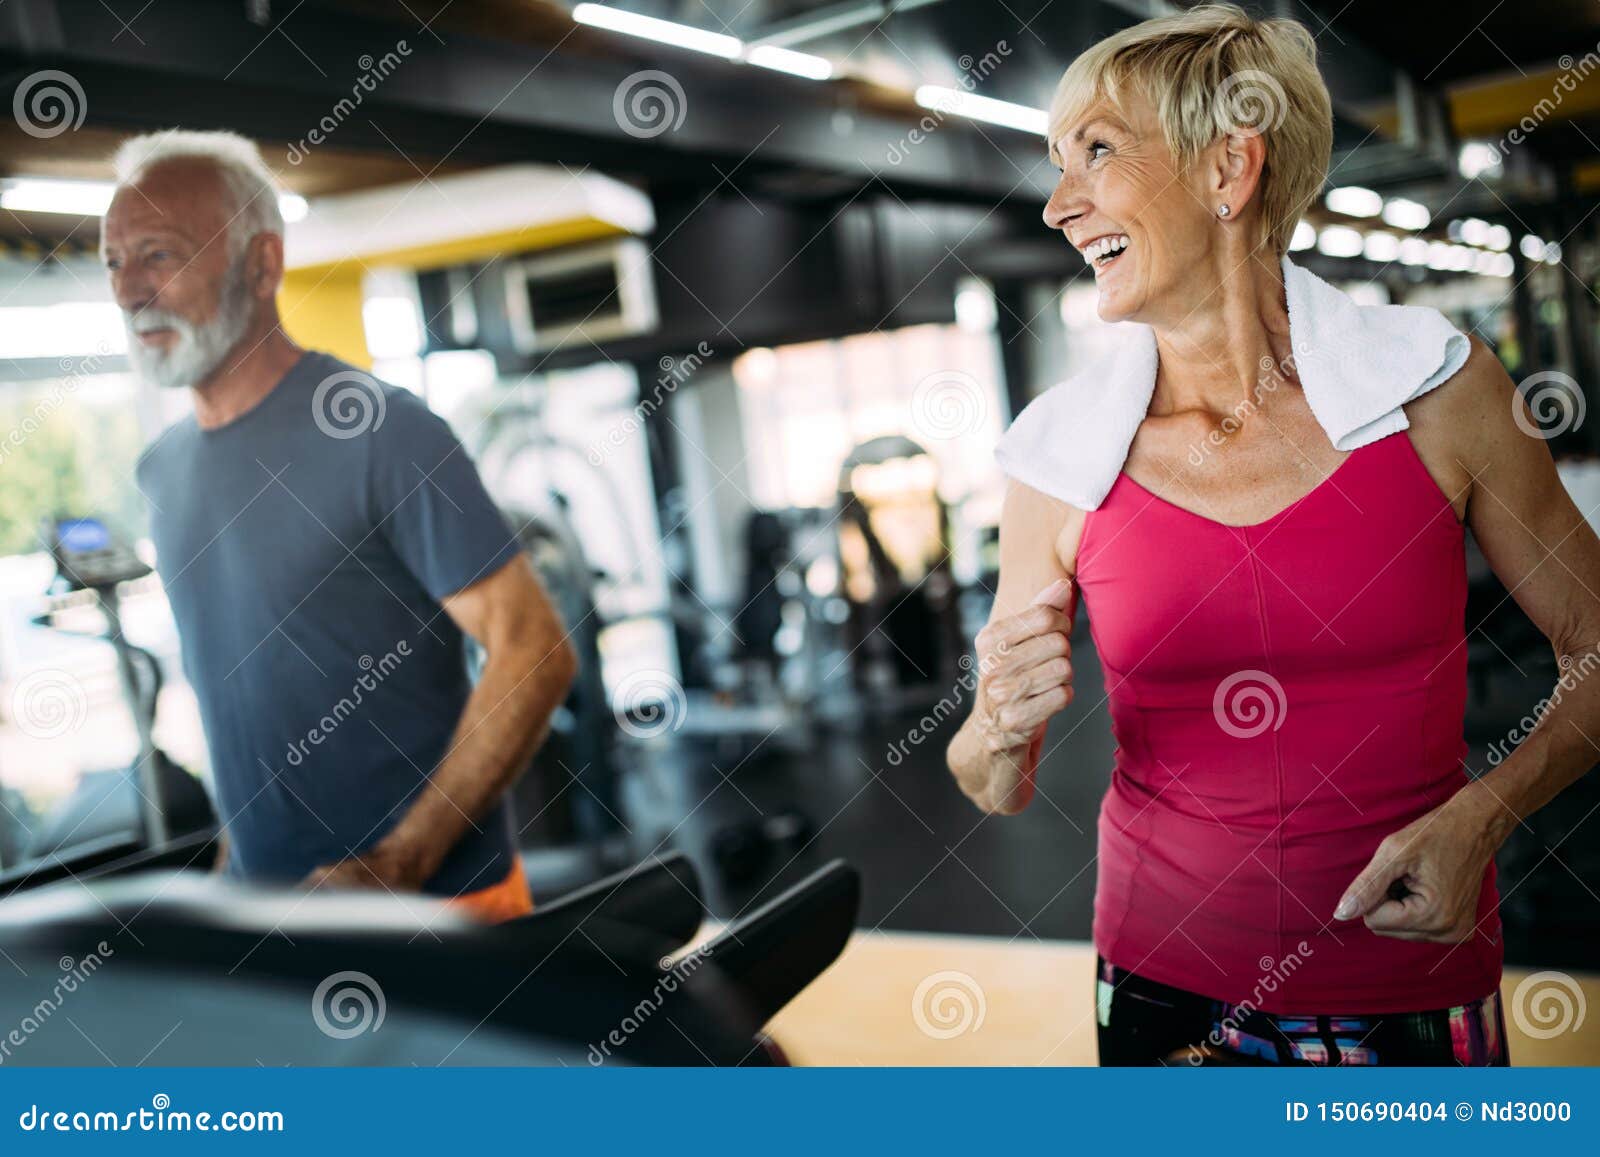 Fit Senior Sporty Couple Working Out Together At Gym Stock Photo